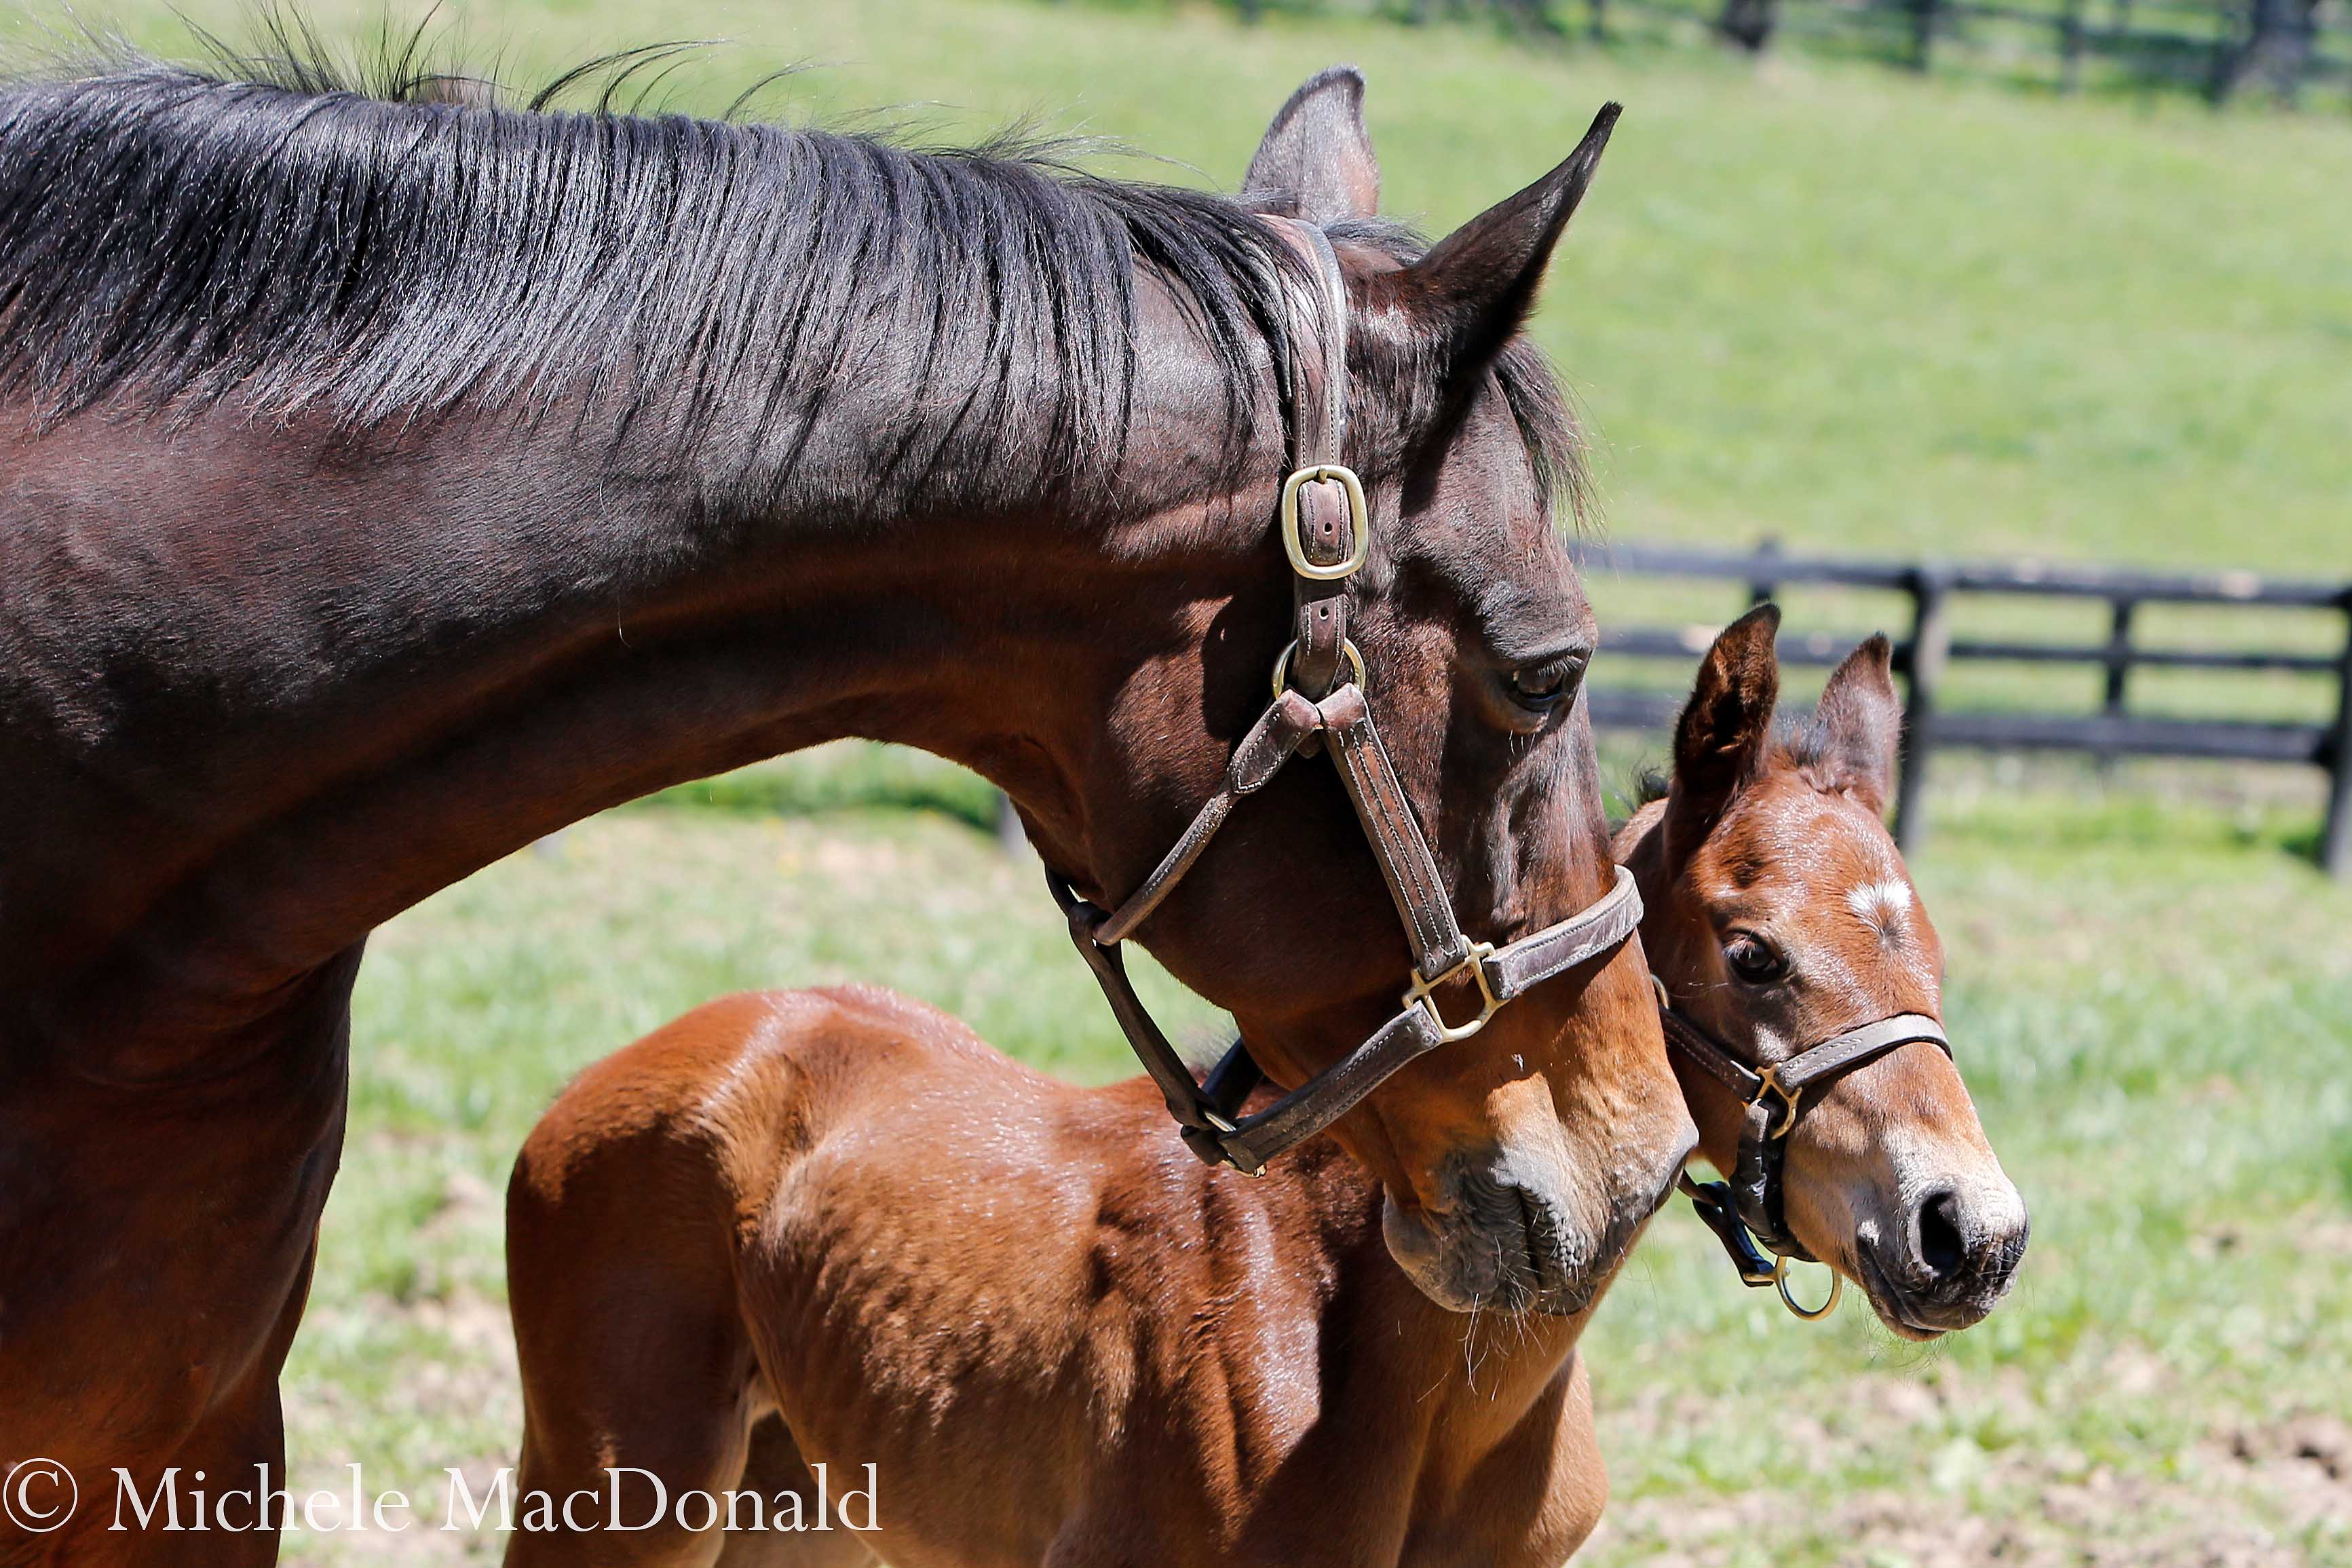 A mother’s love: Leslie’s Lady is taking the duty of raising her new baby with the same earnest commitment she displayed at Clarkland with Beholder and Mendelssohn. Photo: Michele MacDonald